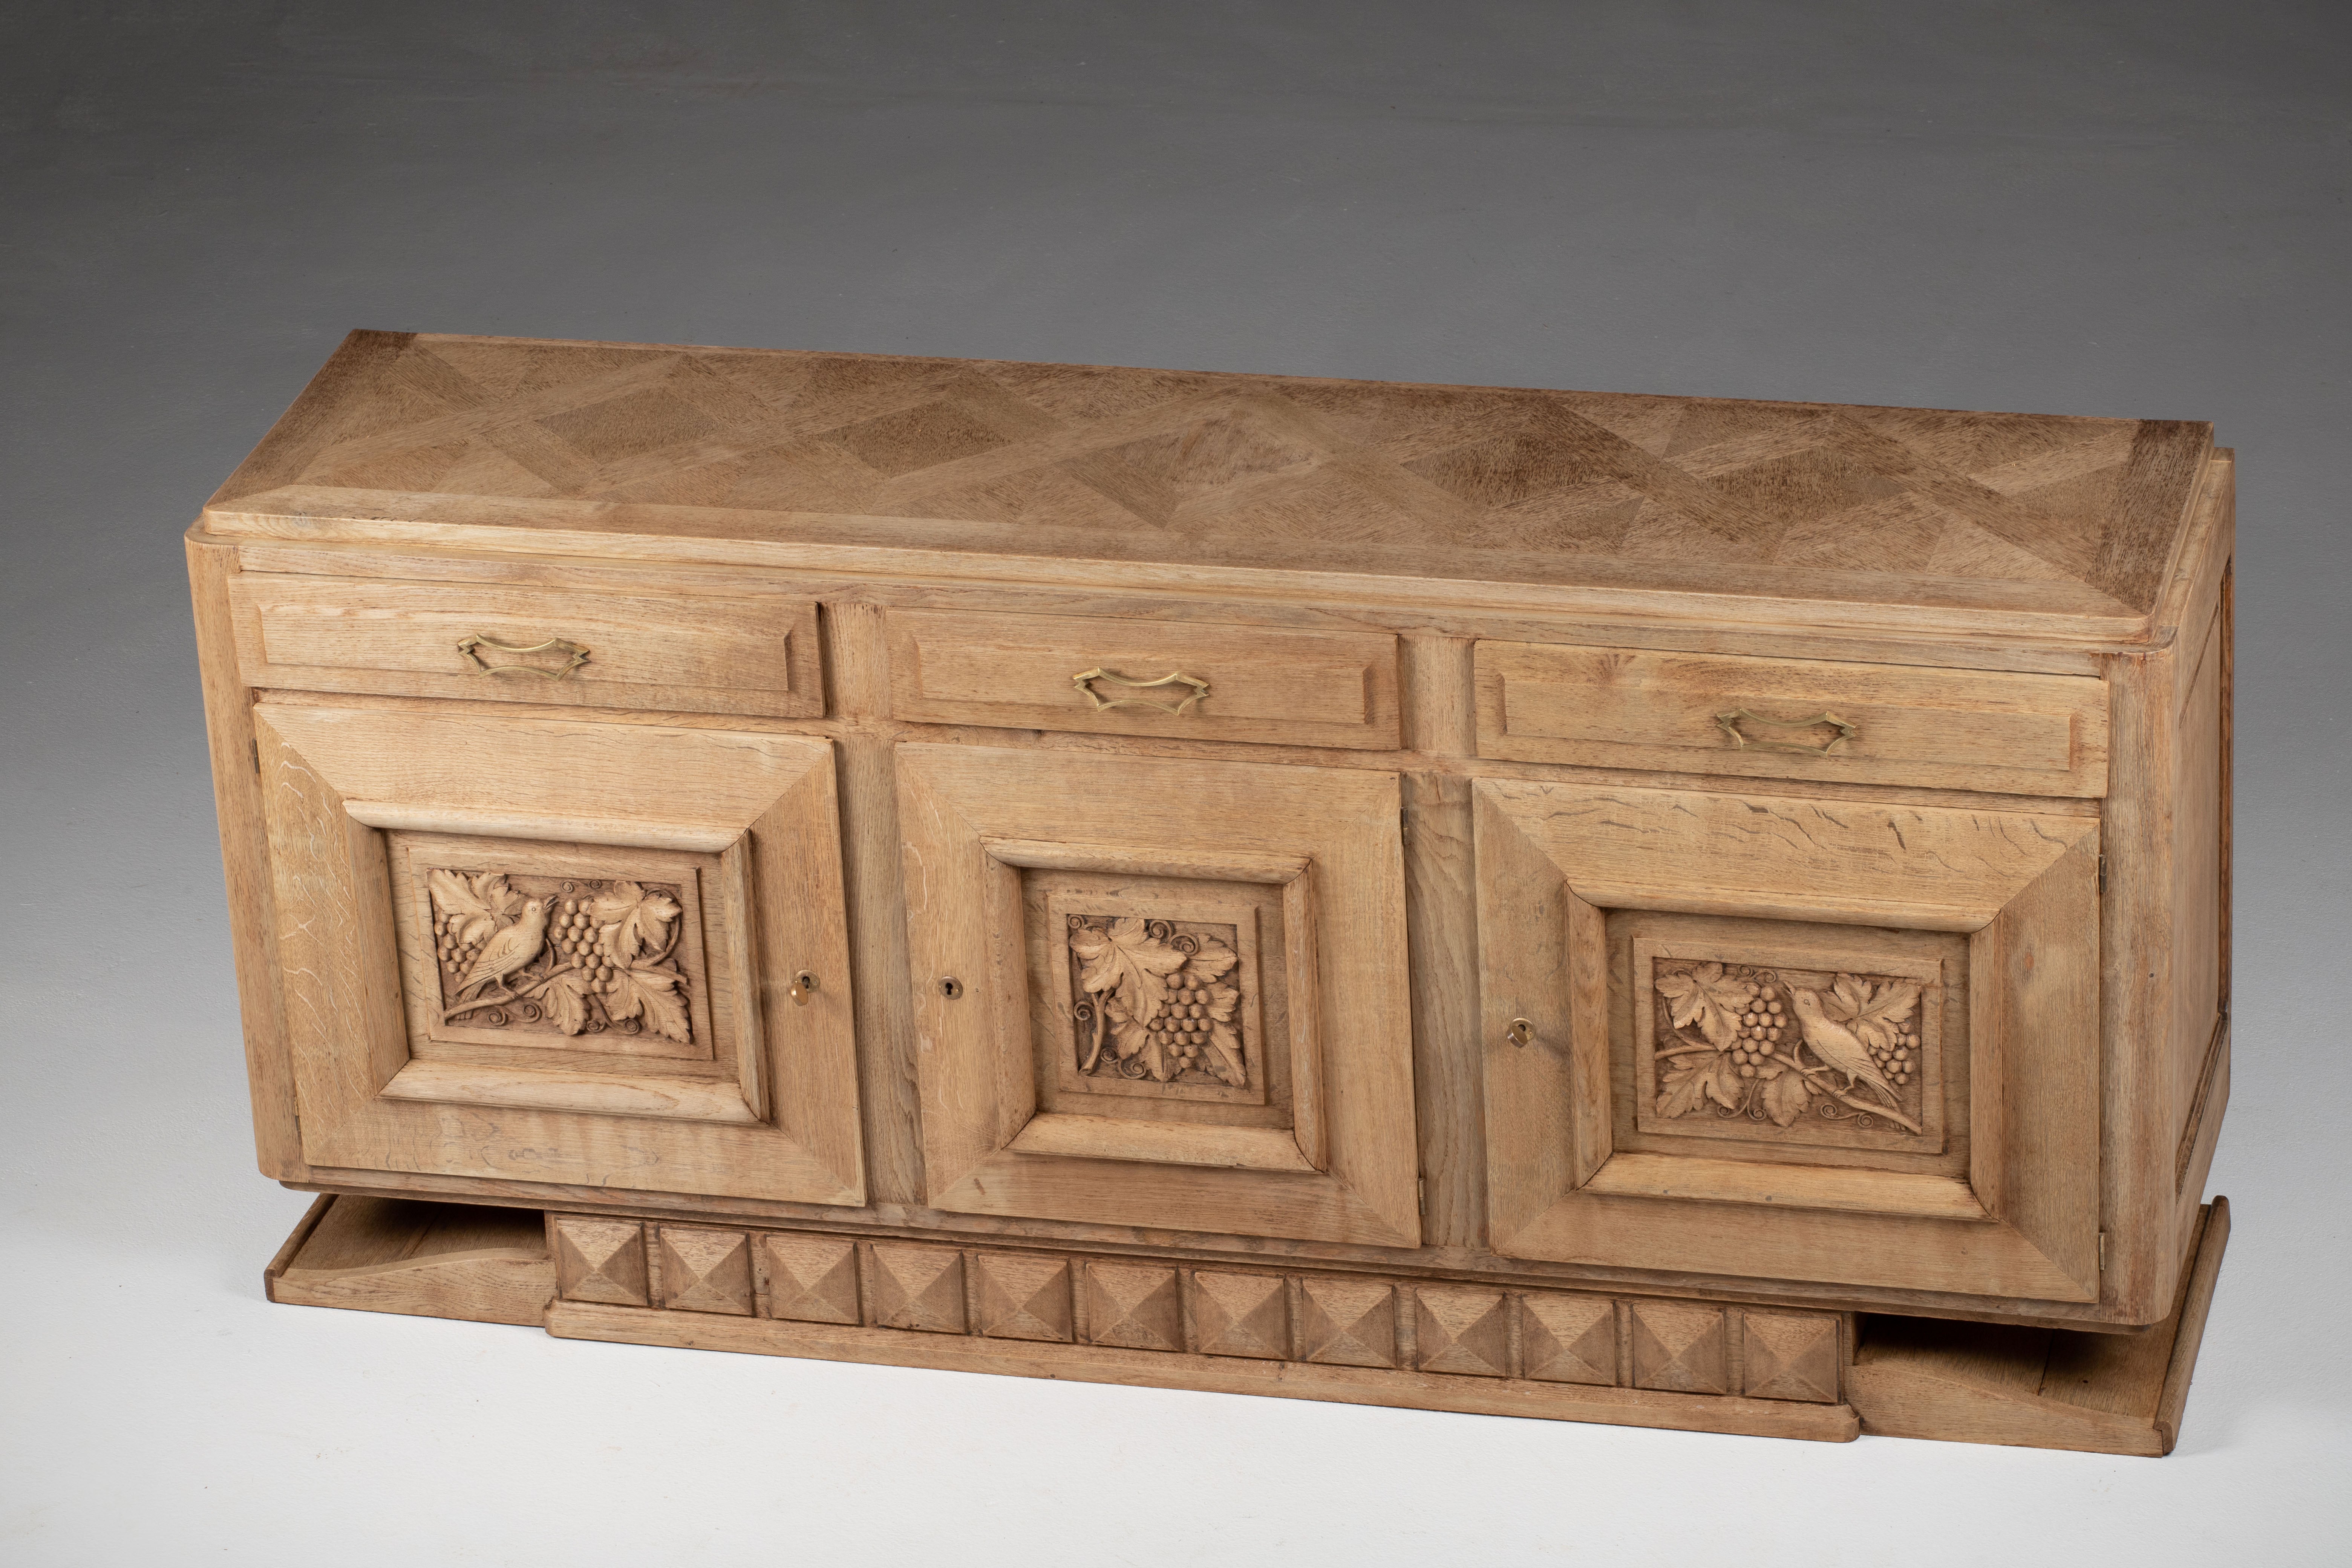 Very elegant credenza in solid oak, France, 1940s.
Art Deco Brutalist sideboard. 
The credenza consists of Two storage facilities covered with handcarved vines designed doors and a column of drawers.
The refined wooden structures on the doors create